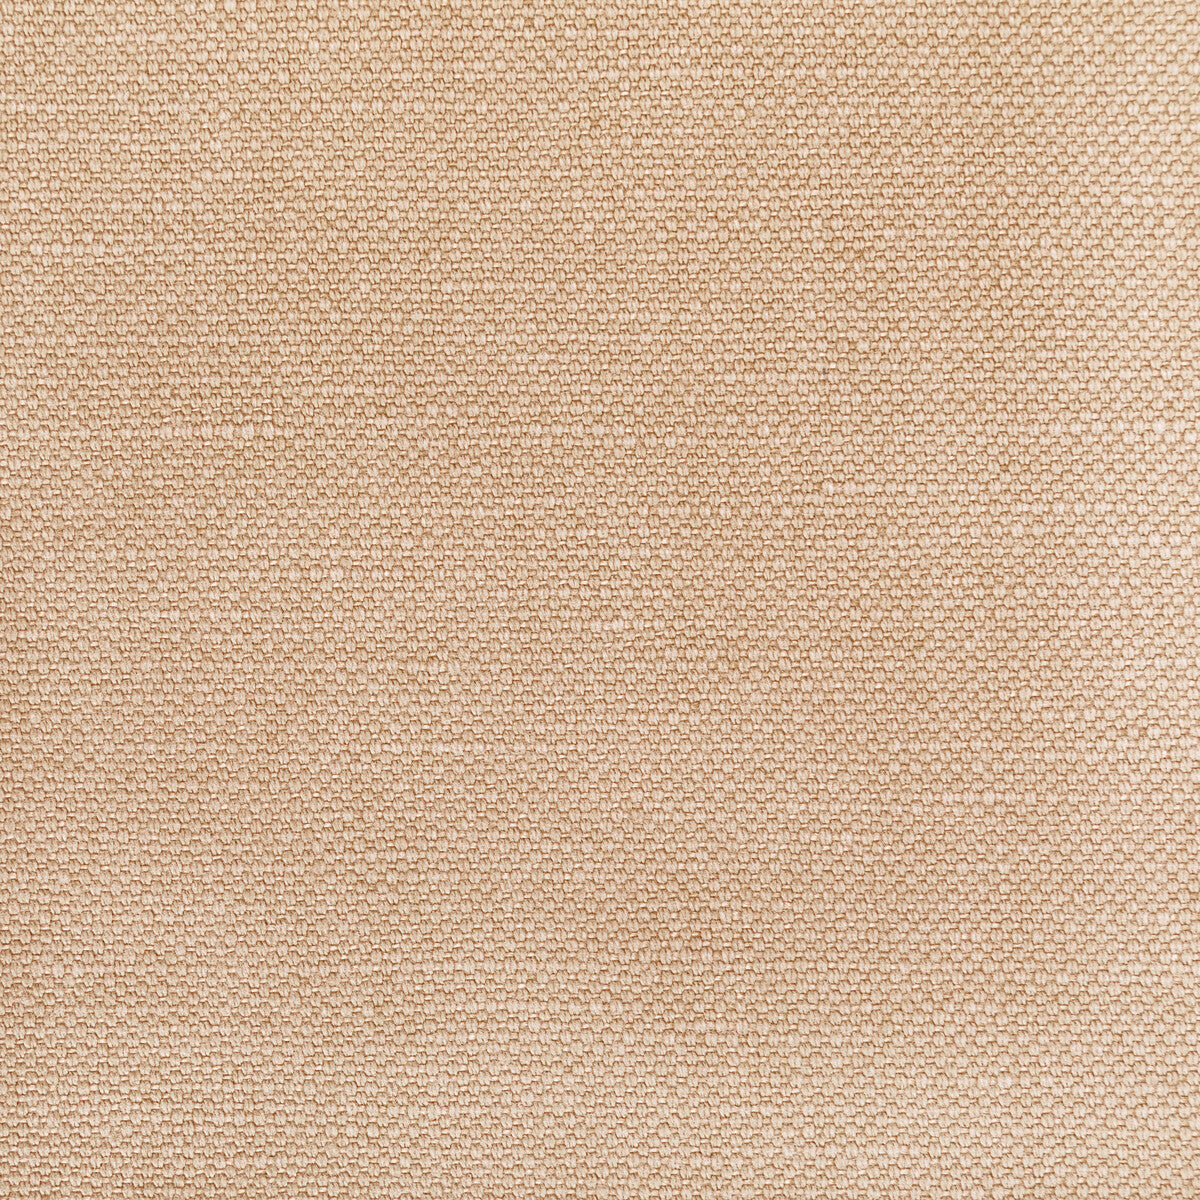 Carson fabric in sand color - pattern 36282.106.0 - by Kravet Basics